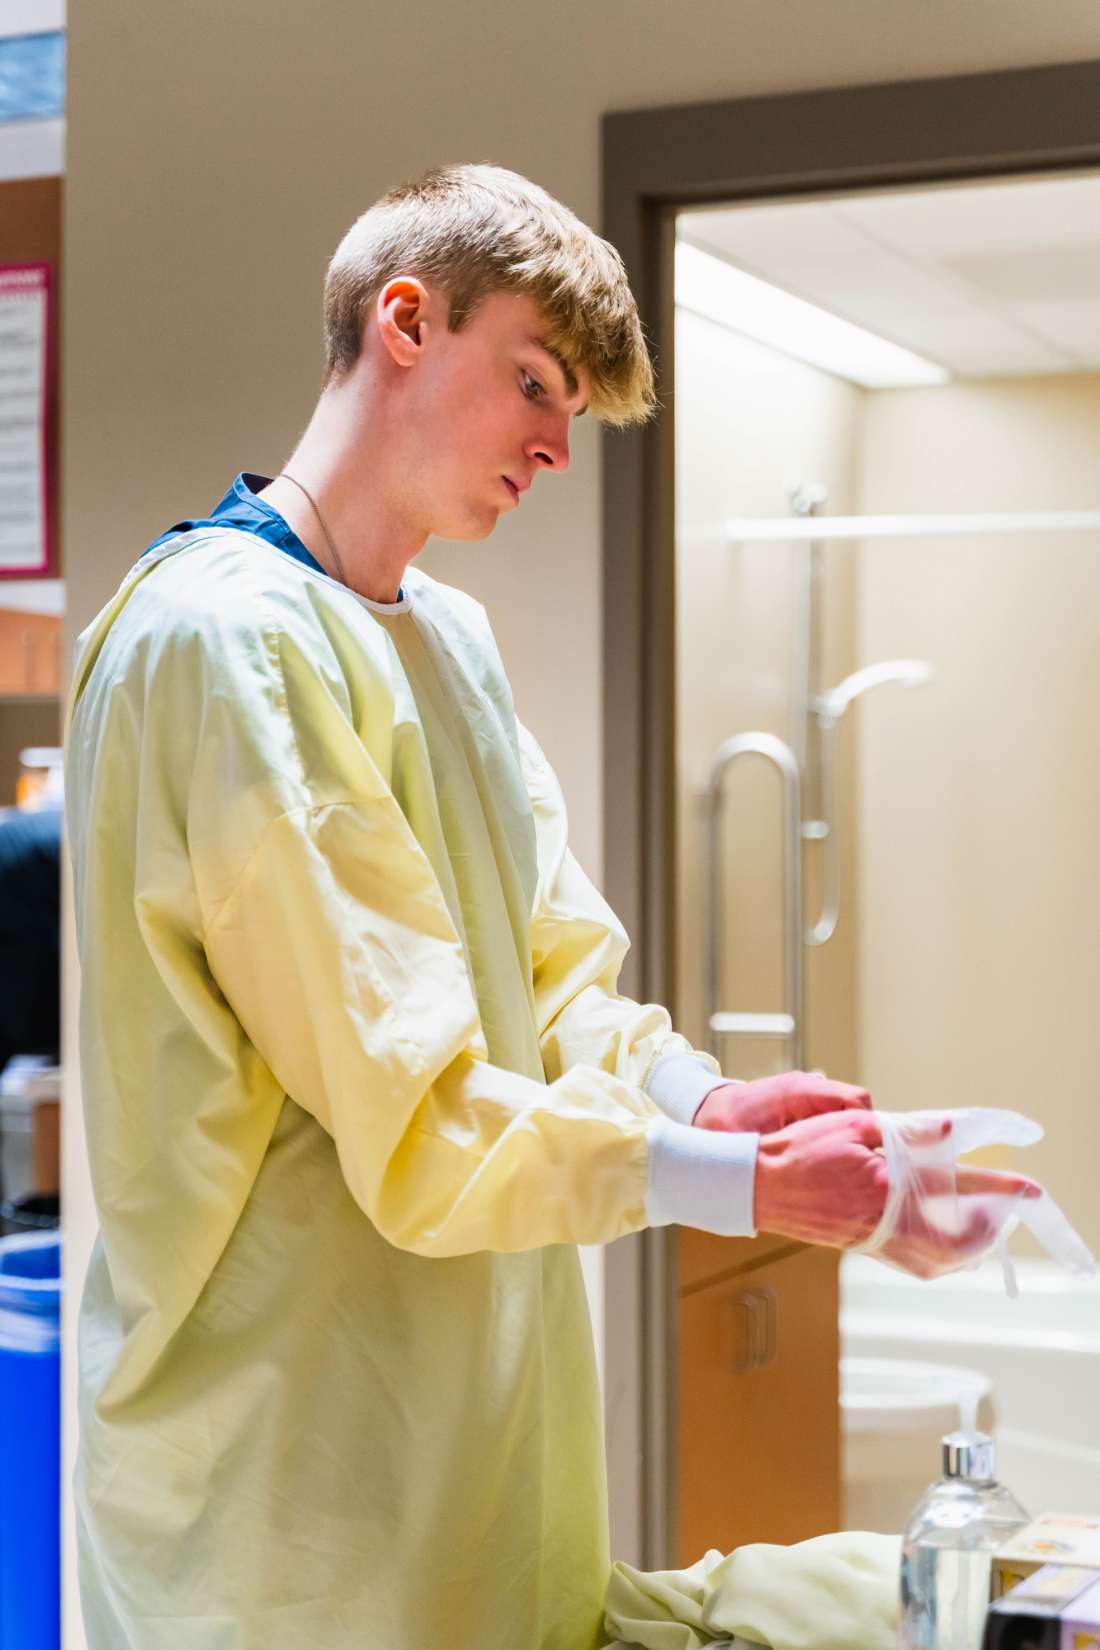 A Nursing Assistant wearing yellow scrubs is putting on rubber gloves.